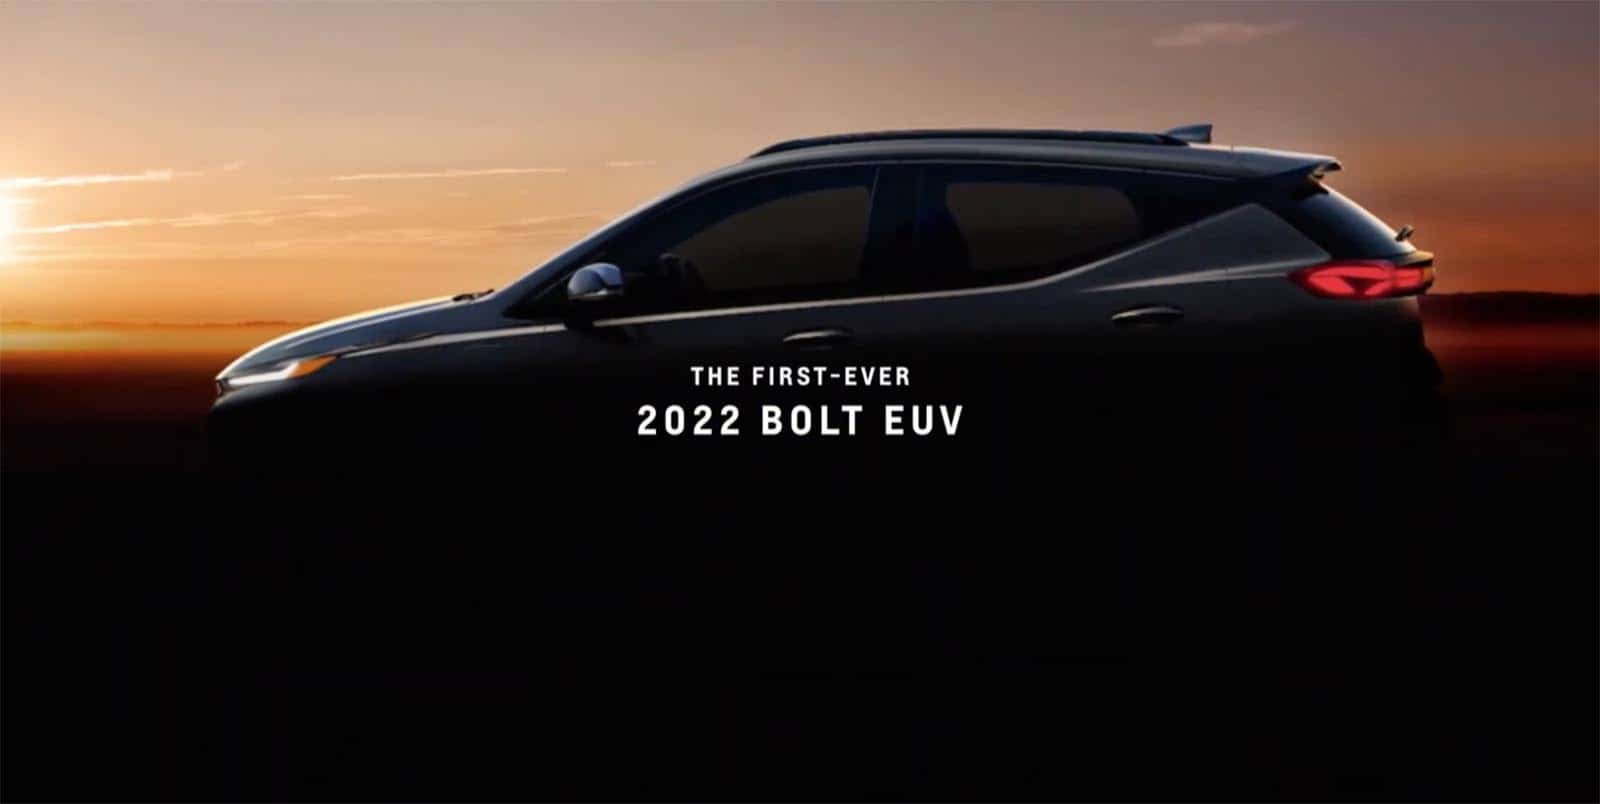 chevy partnering with disney to reveal new bolt euv refreshed bolt ev